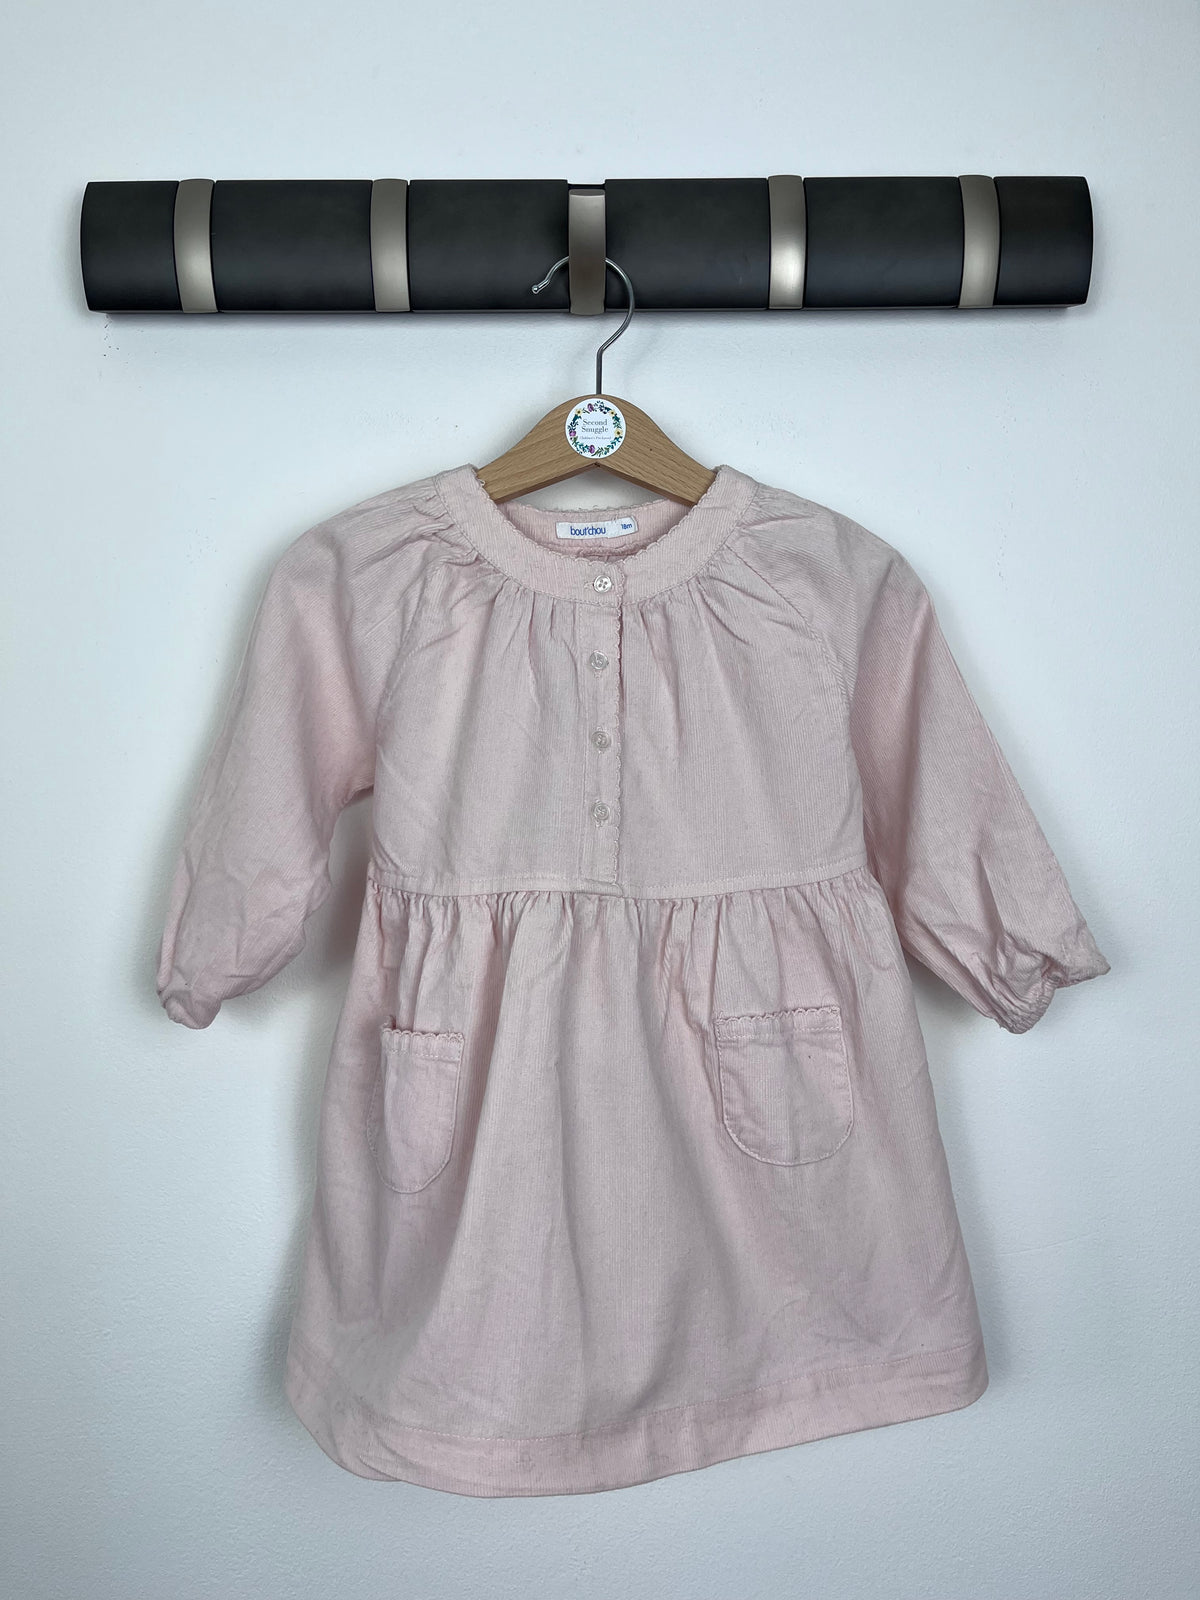 bout'chou 18 Months-Dresses-Second Snuggle Preloved